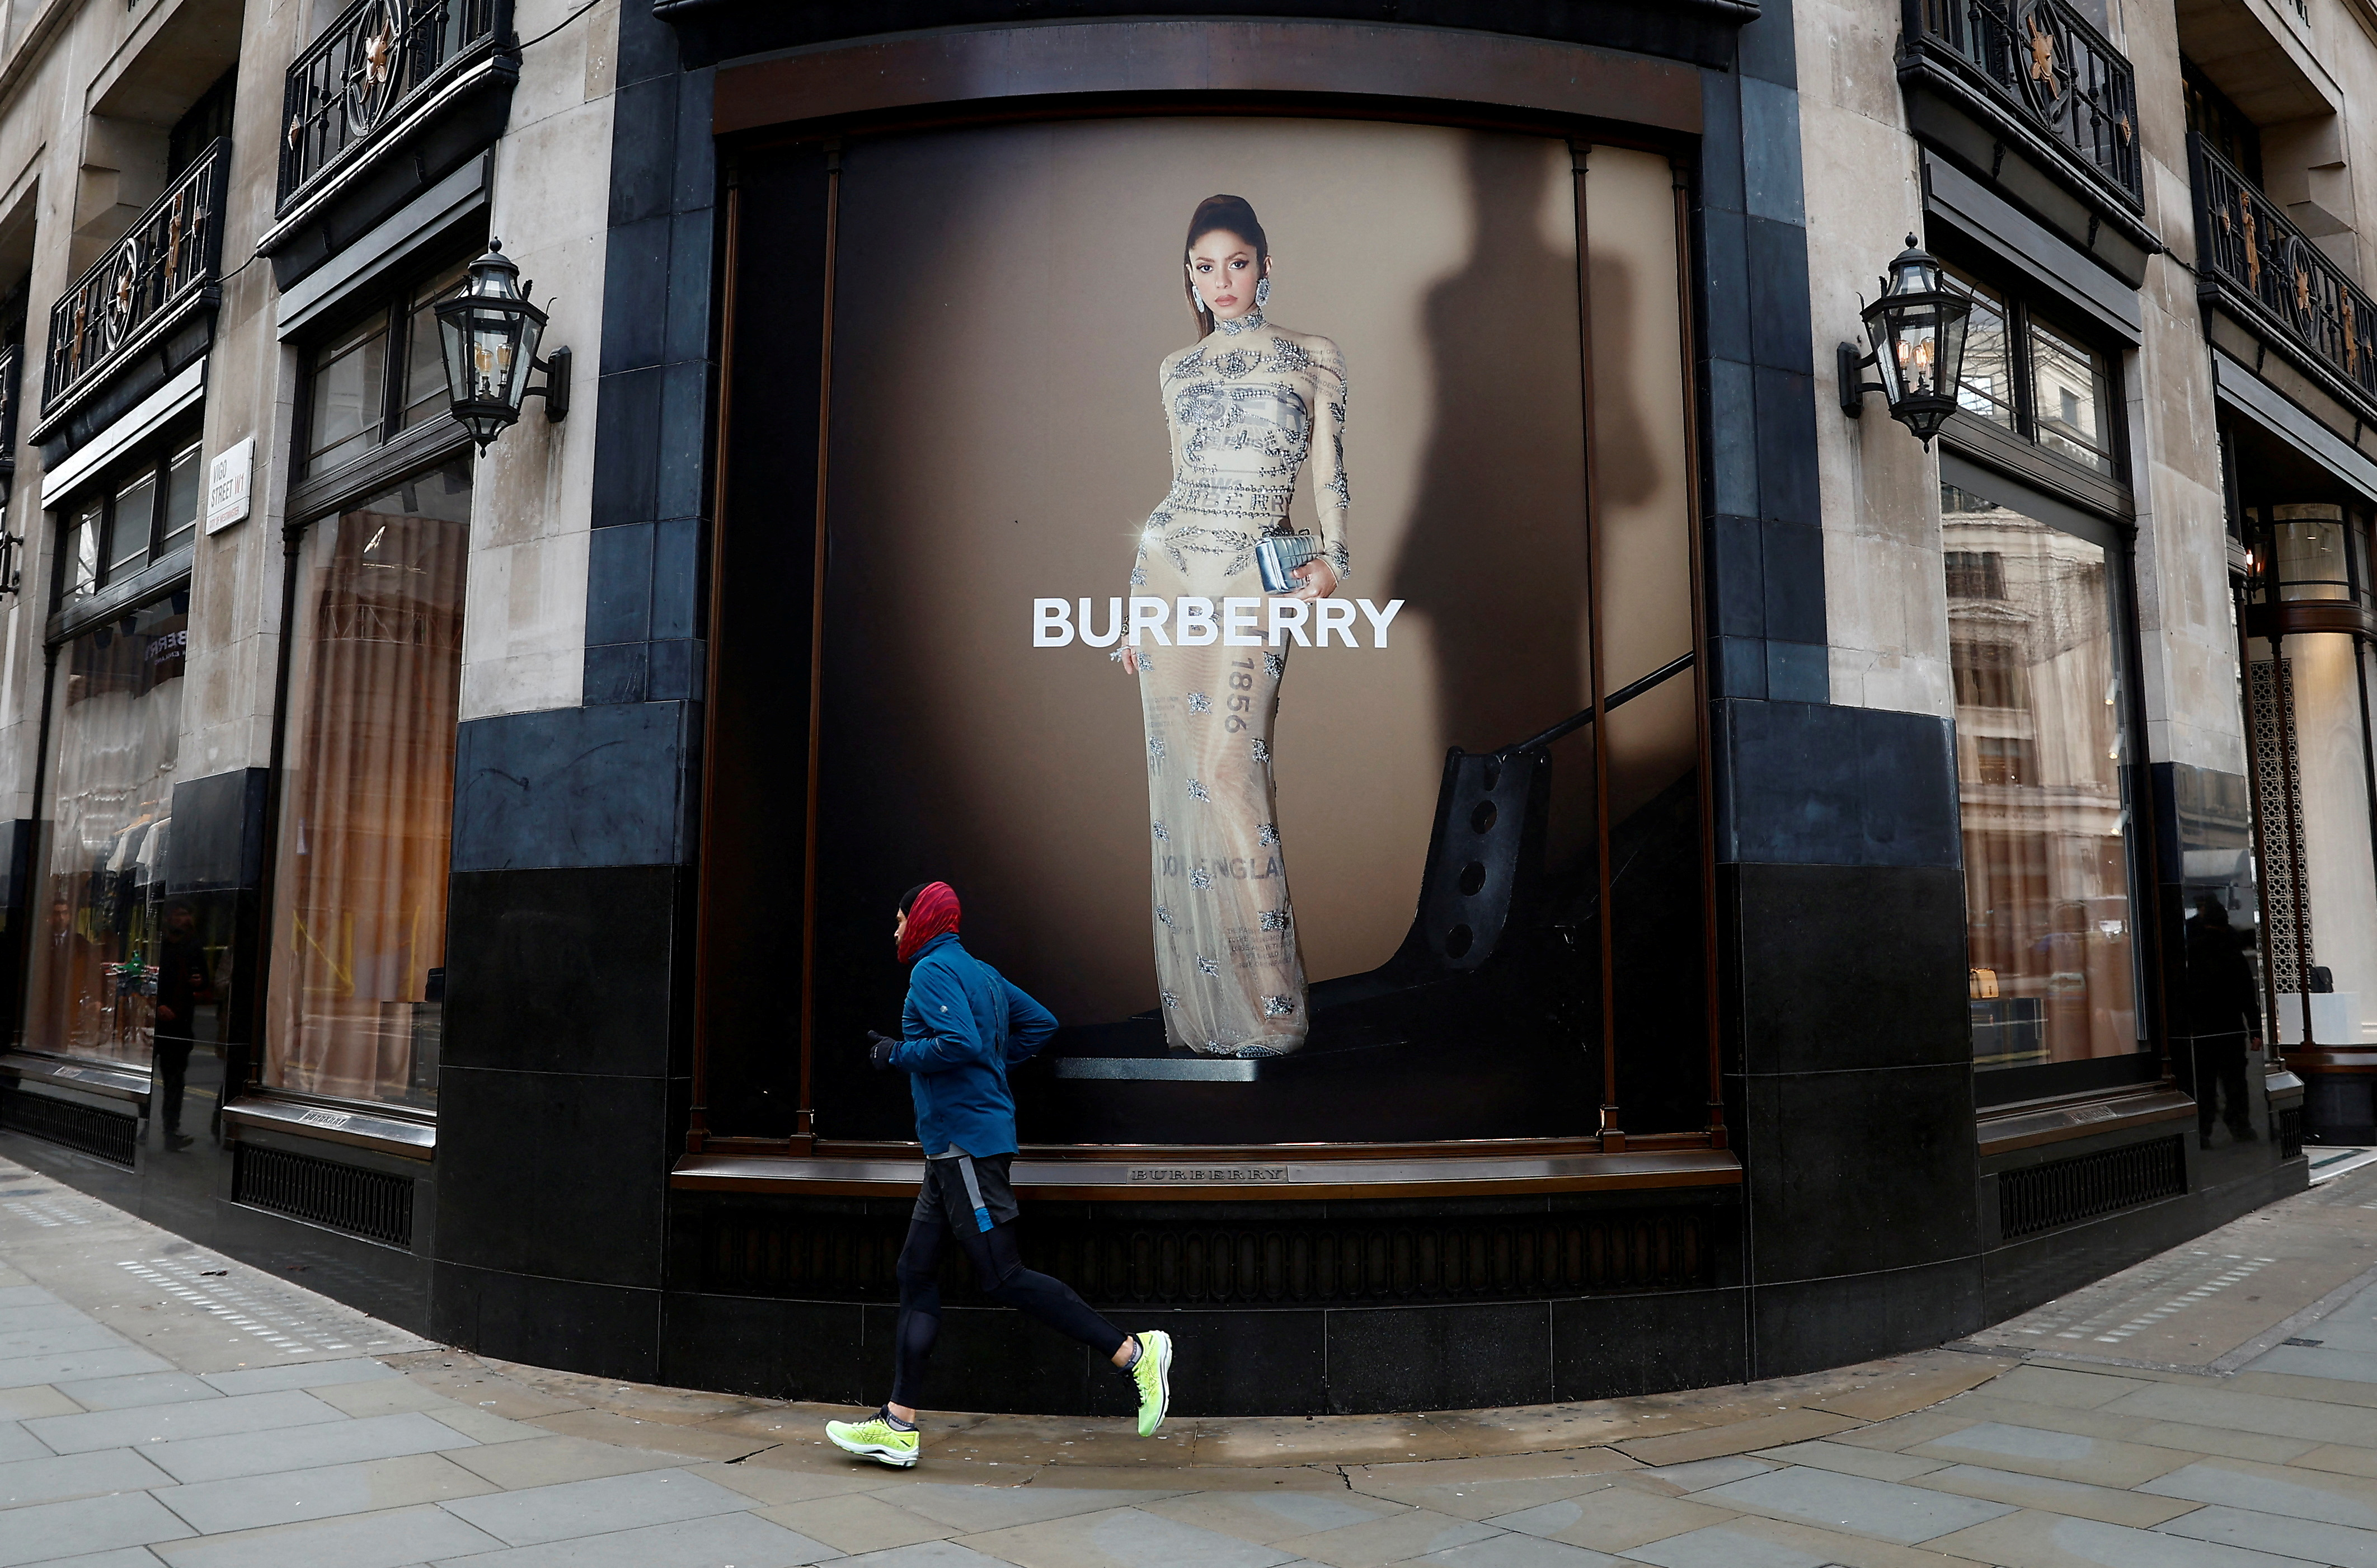 Daily Media: Changes at Burberry